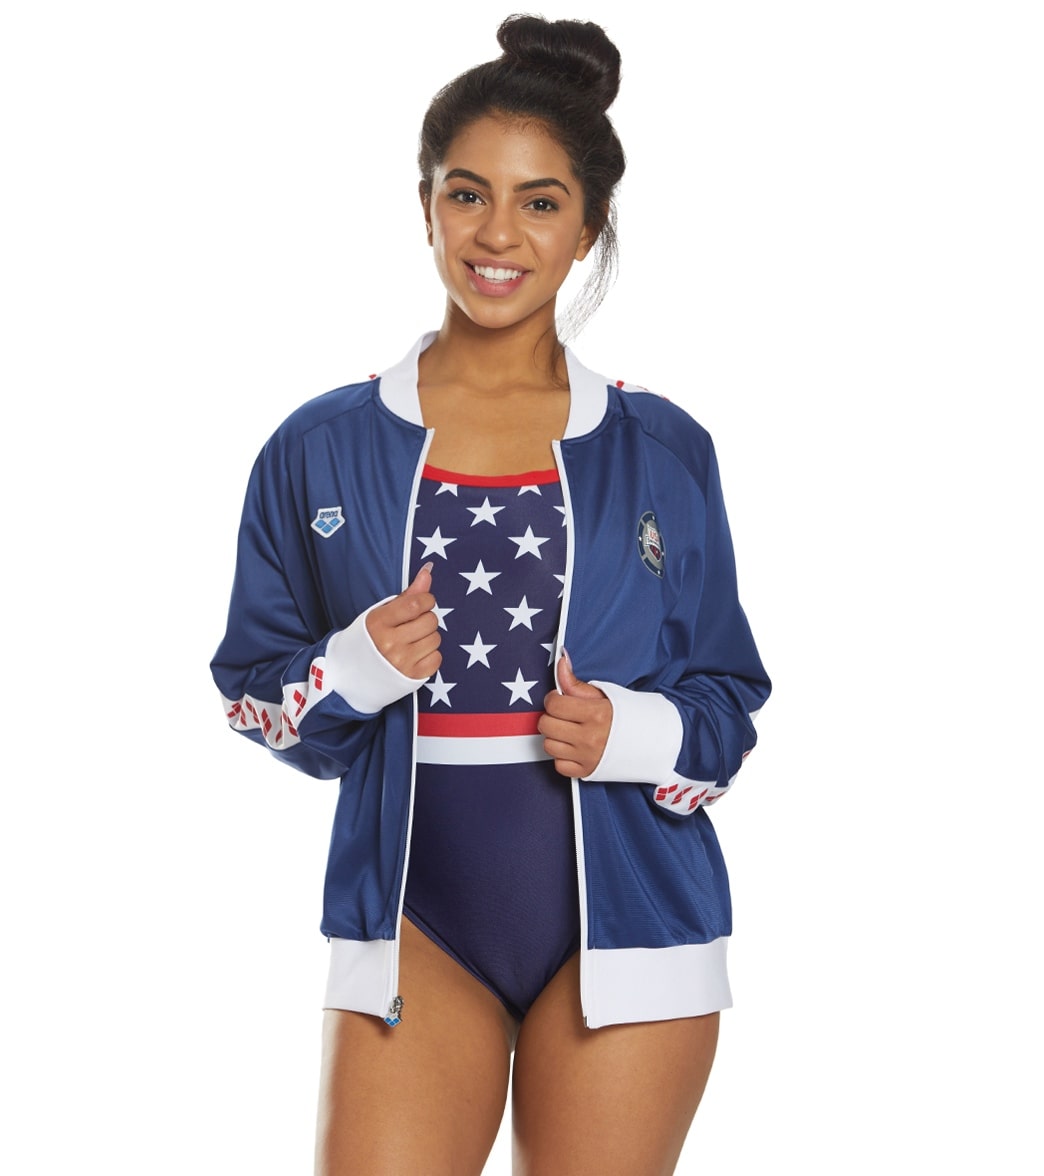 Arena Women's National Team Relax Iv Jacket - Navy/White/Red Medium Size Medium Polyester - Swimoutlet.com